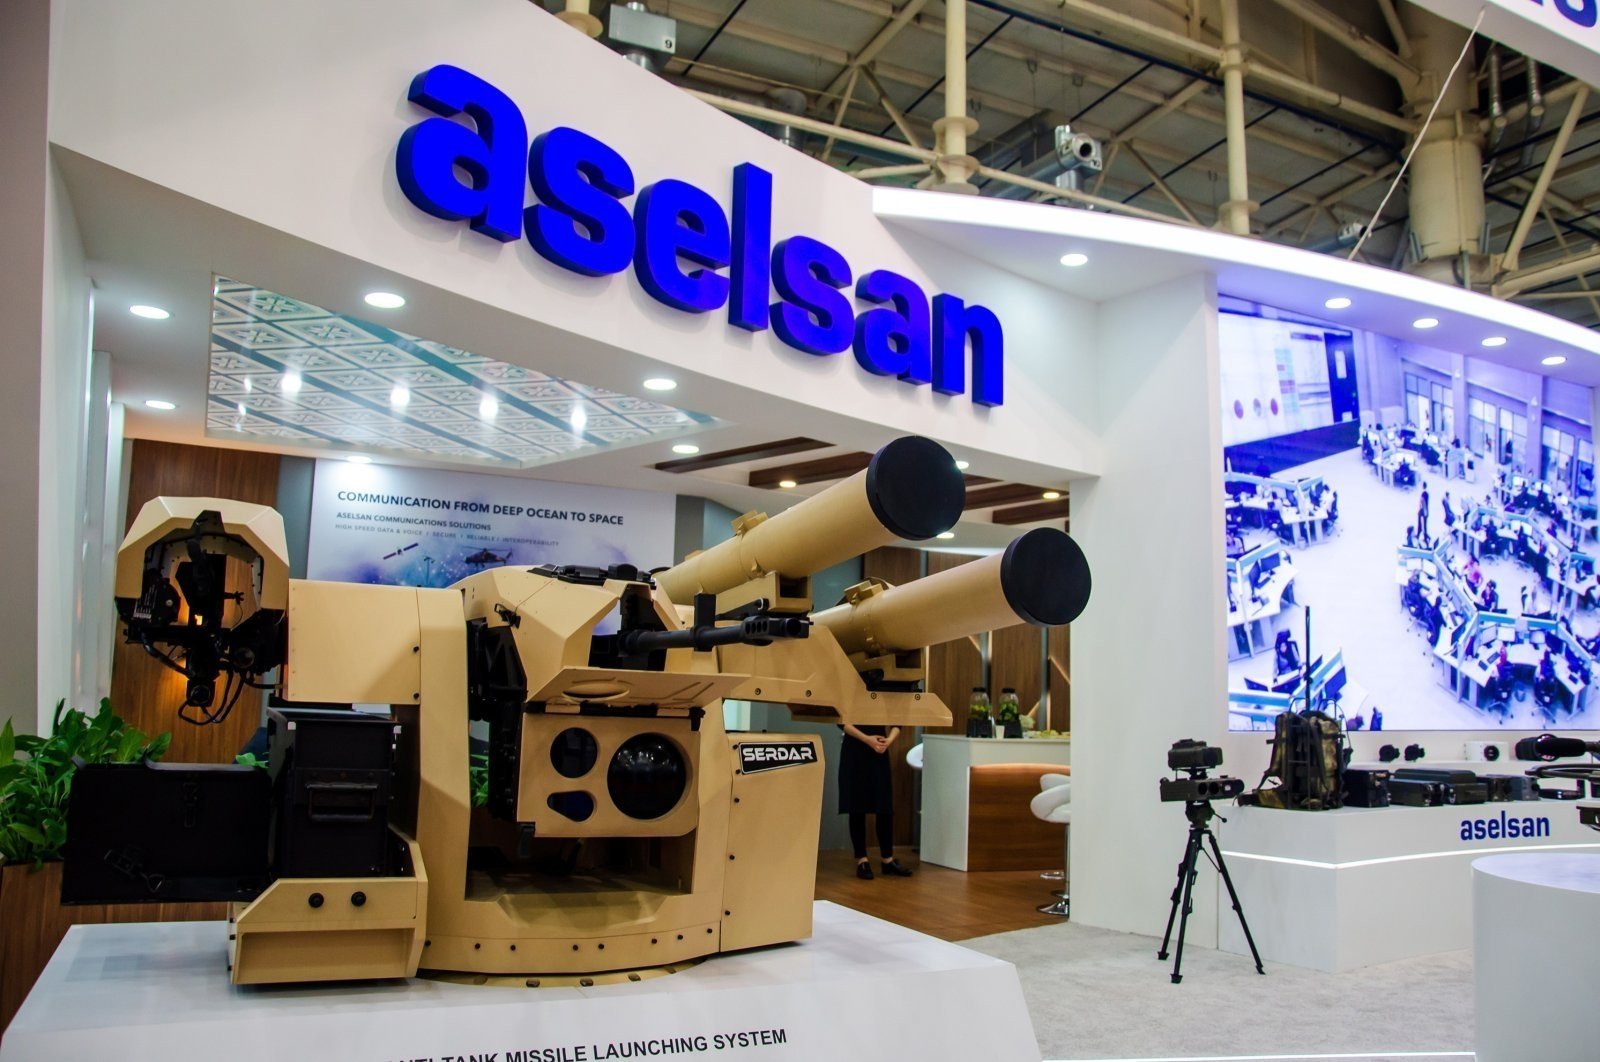 An Aselsan missile launching system on display at a defense fair in Kyiv, Ukraine, Oct. 9, 2019. (Shutterstock Photo)